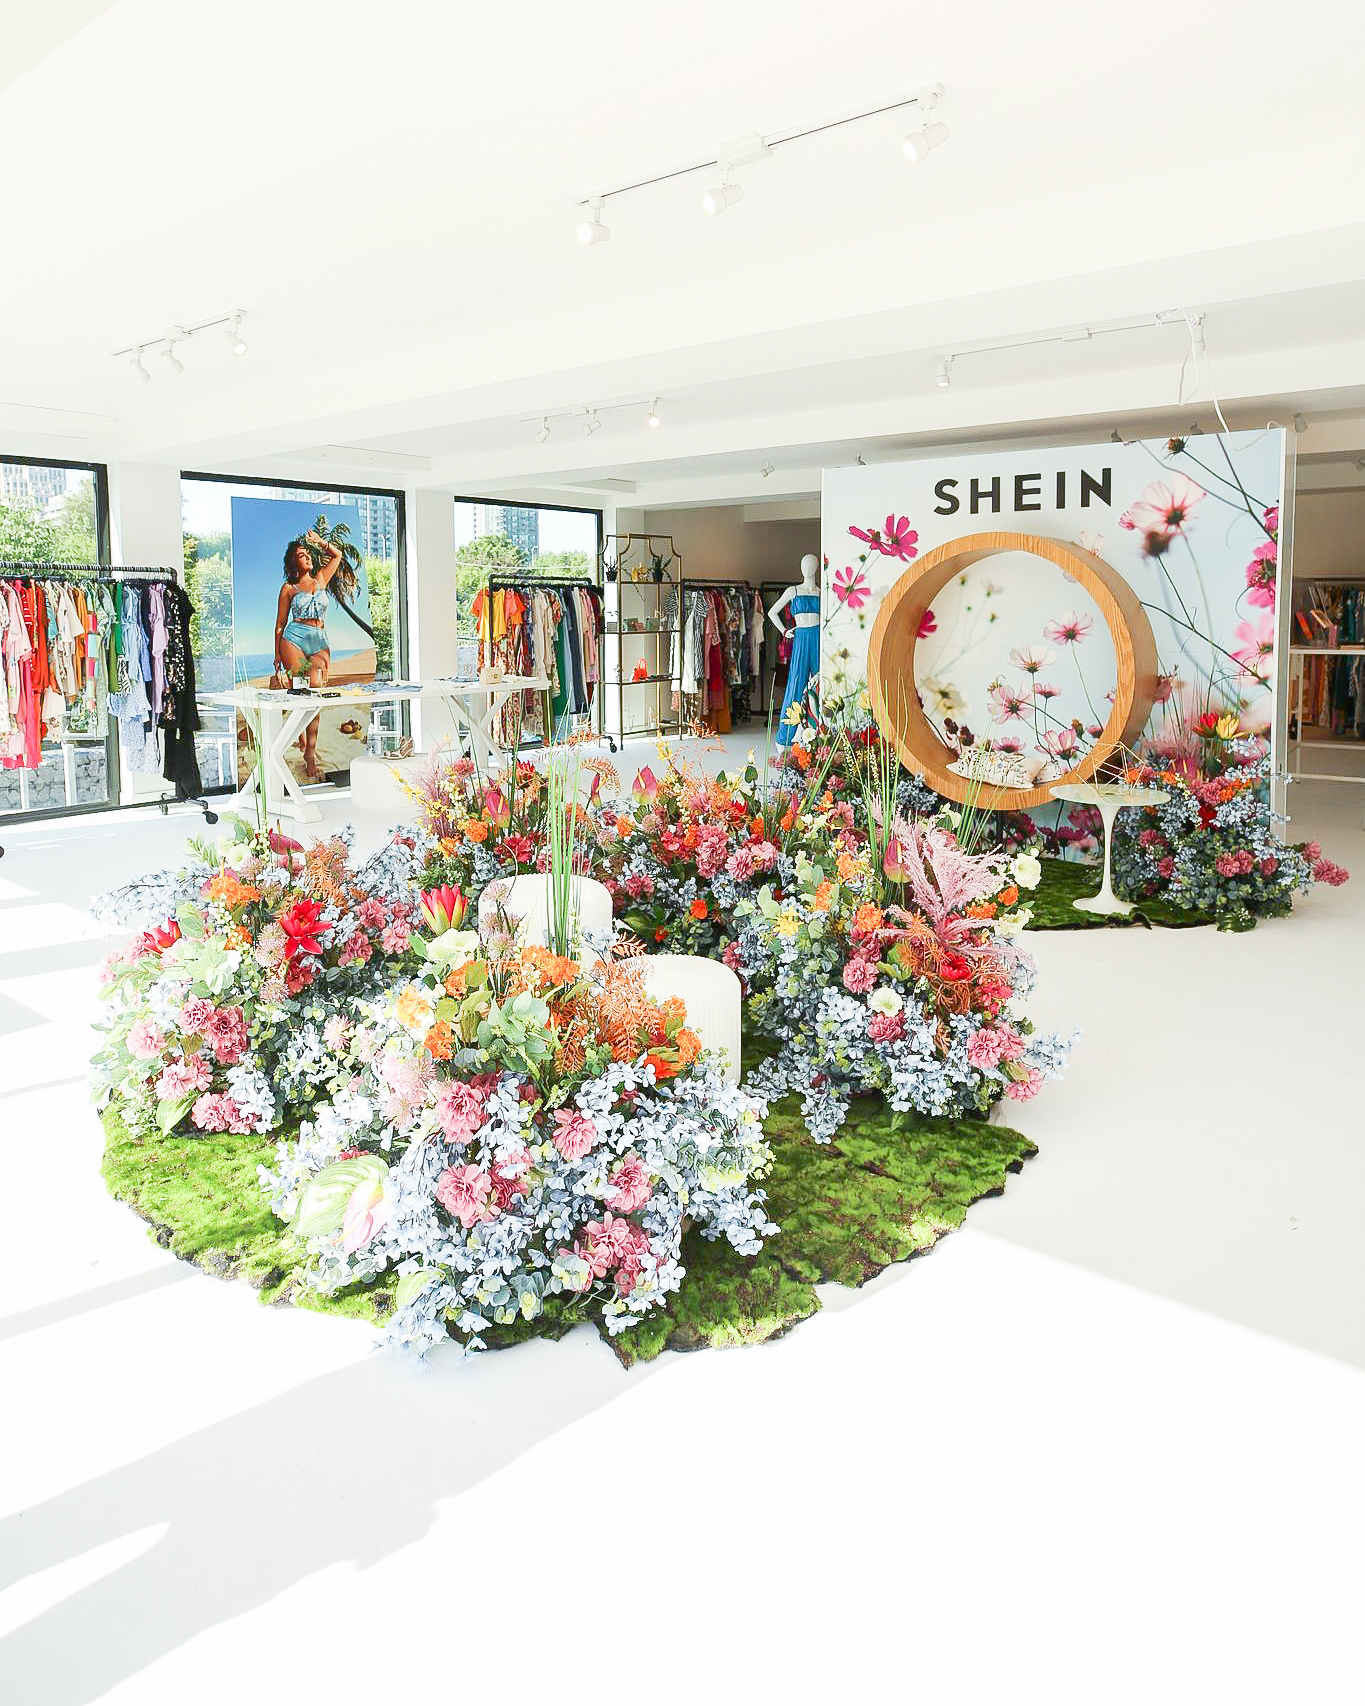 SHEIN to Launch 'See Now Buy Now' Shopping Experience At